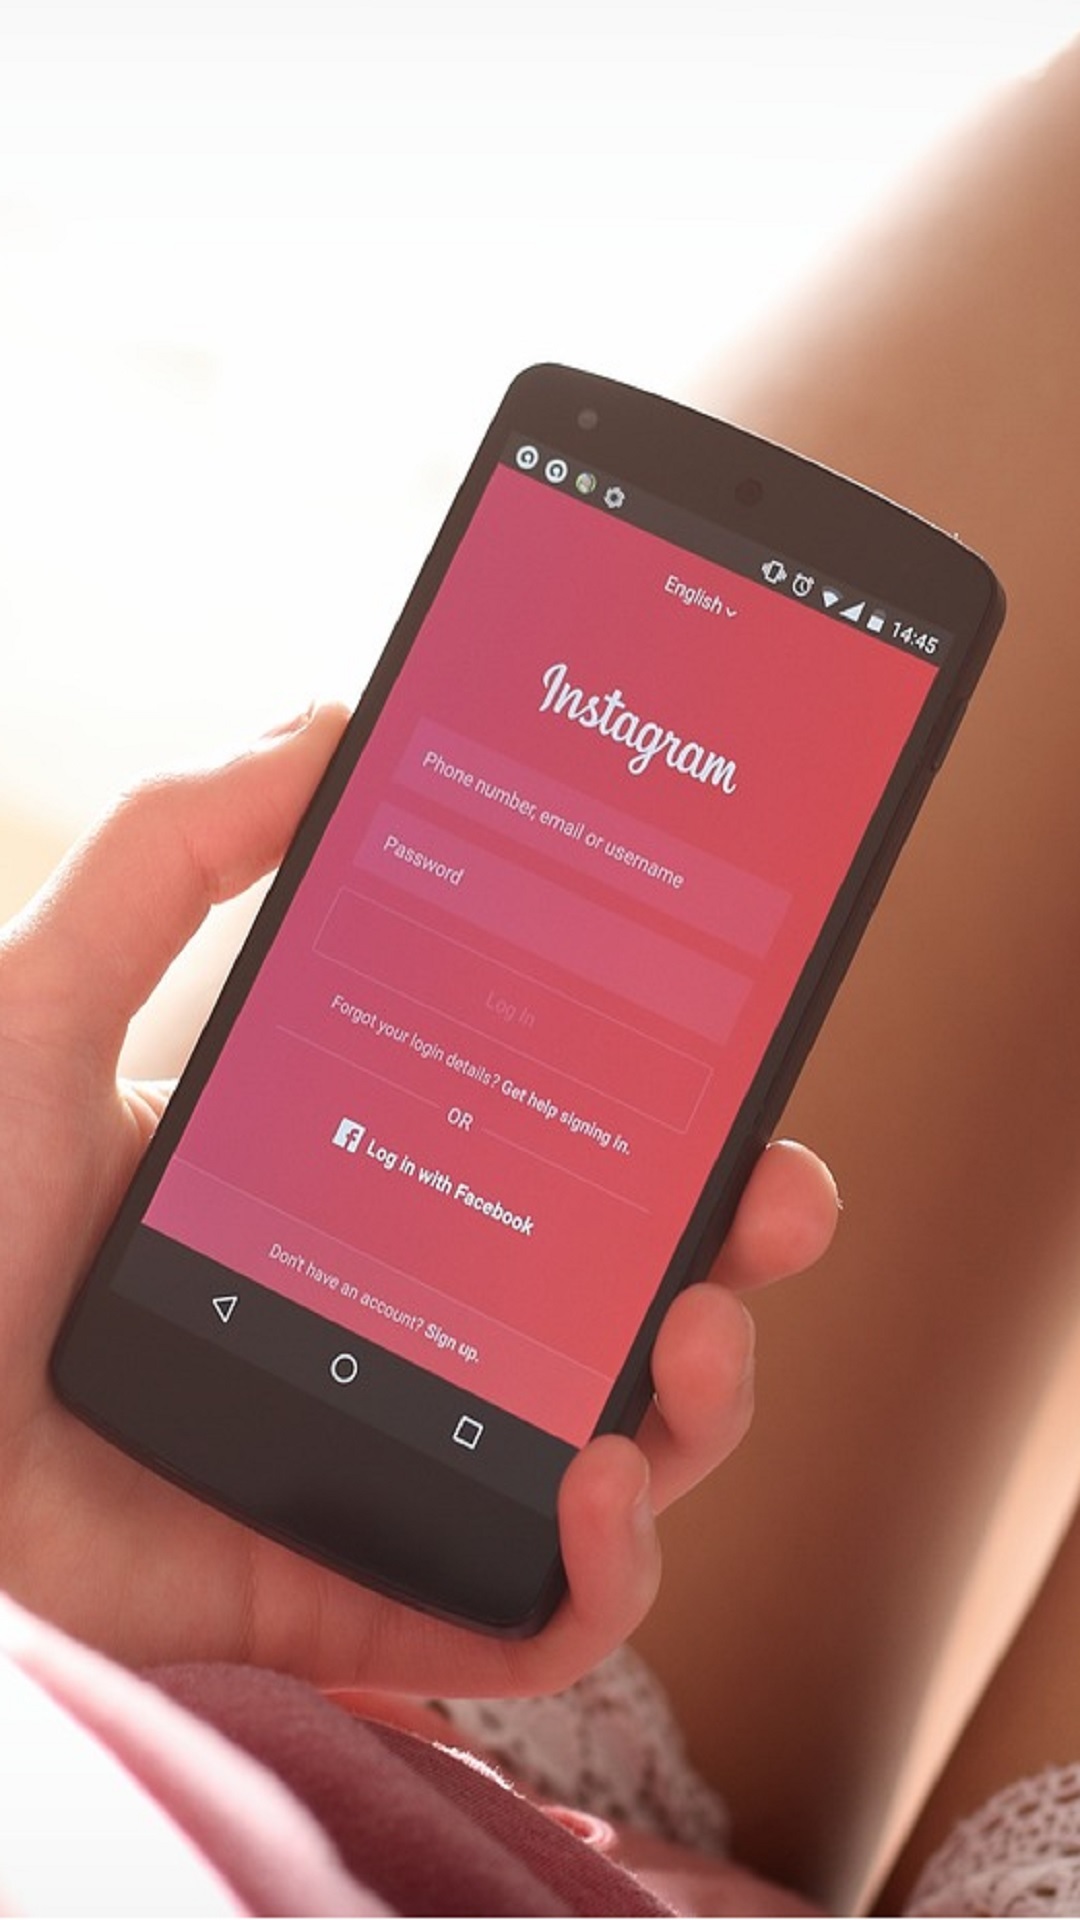 Steps to create an Instagram broadcast channel on iOS and Android

